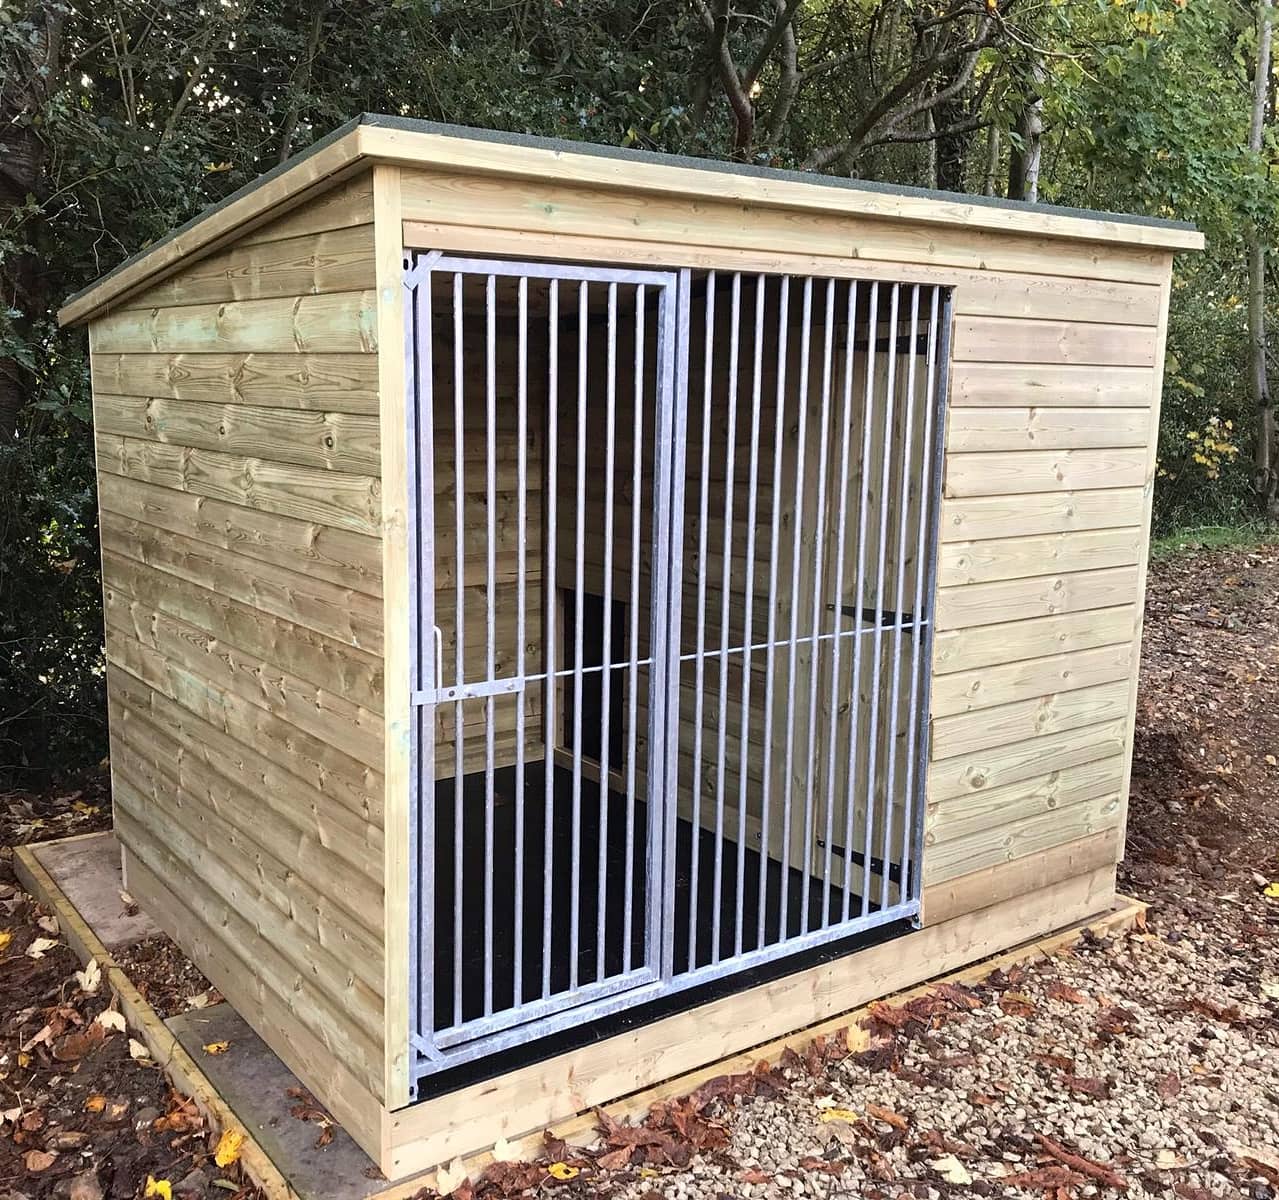 Chesterfield Wooden Dog Kennel And Run 14ft (wide) x 5ft (depth) x 5'11ft (high)